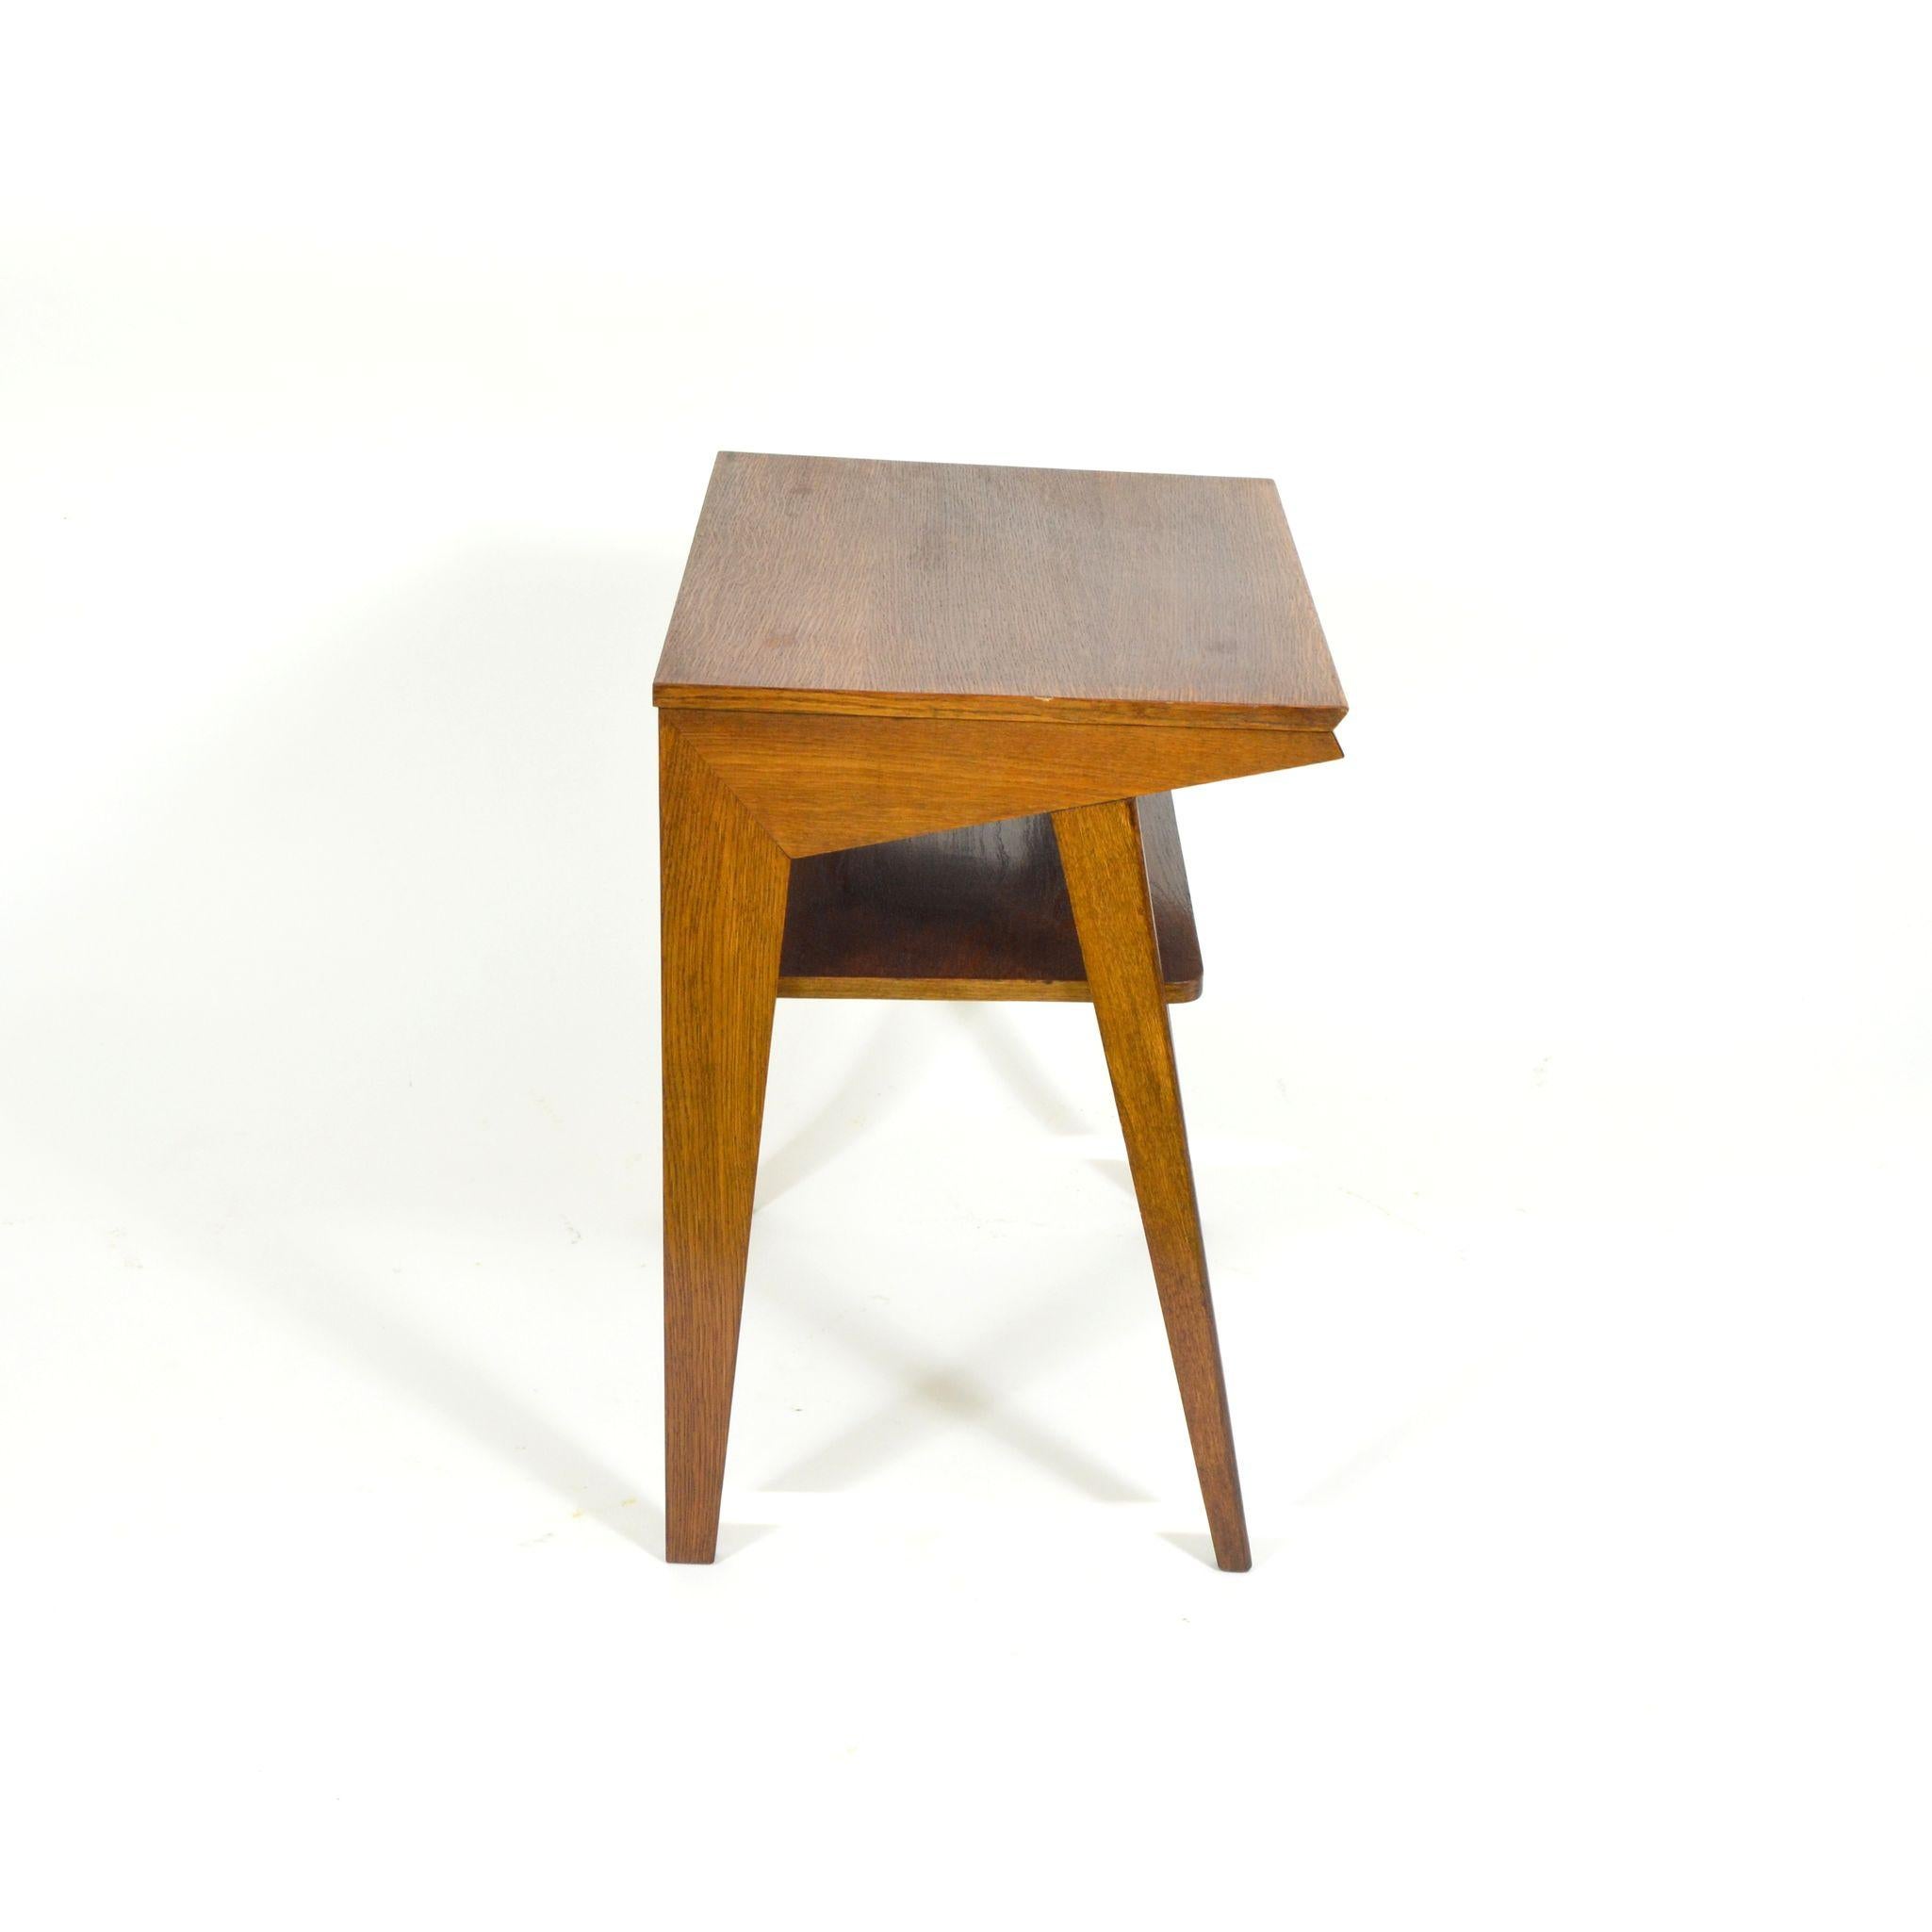 Darked Stained Oak Side Table, 1970s In Good Condition For Sale In Zbiroh, CZ